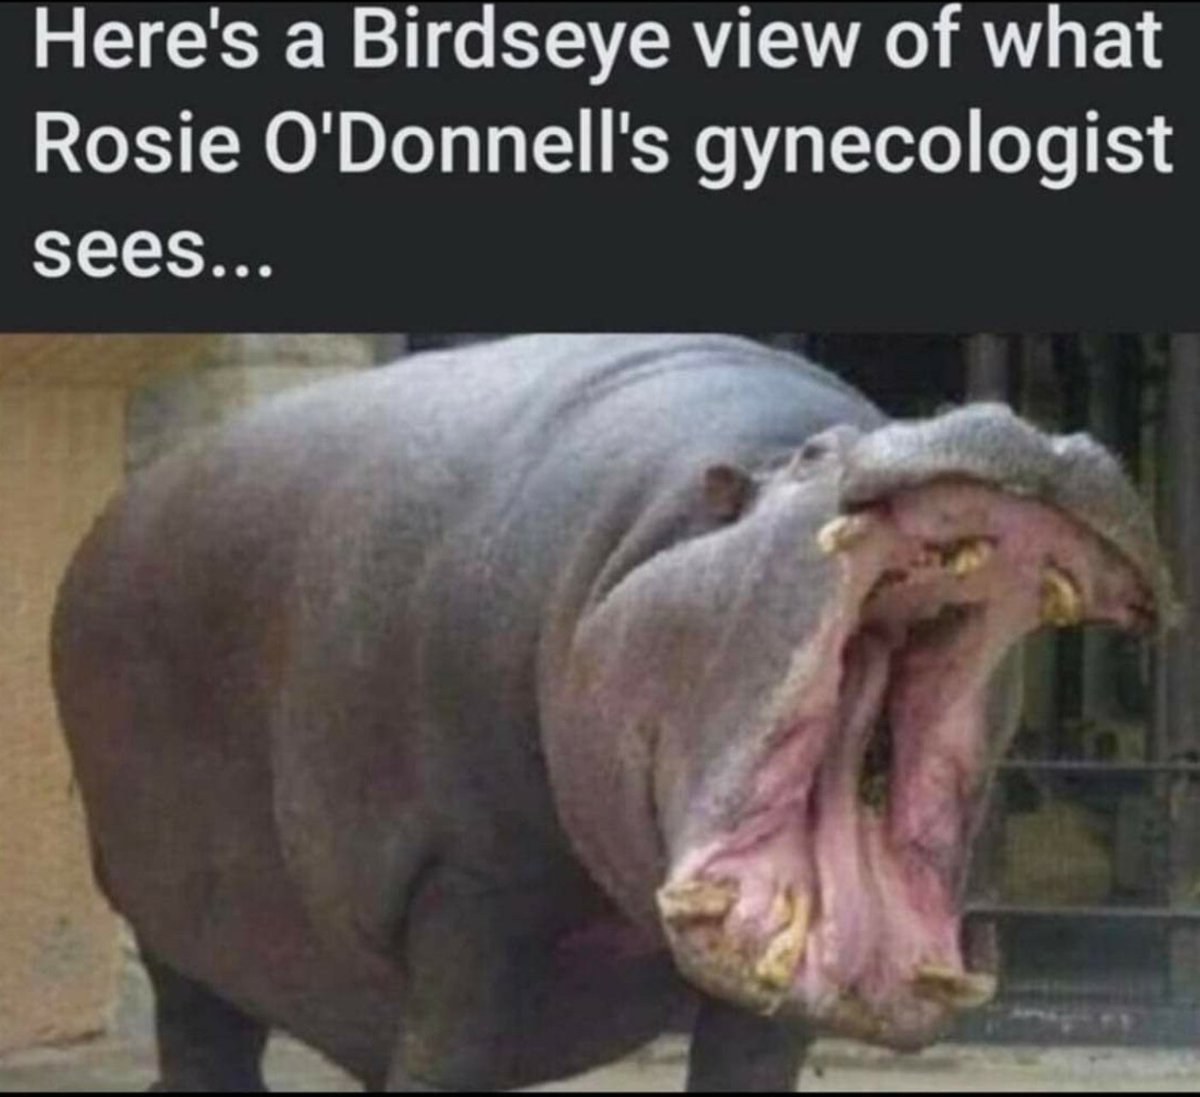 I'd hate to be that Dr. #HipposOfTwitter #WholeLottaRosie